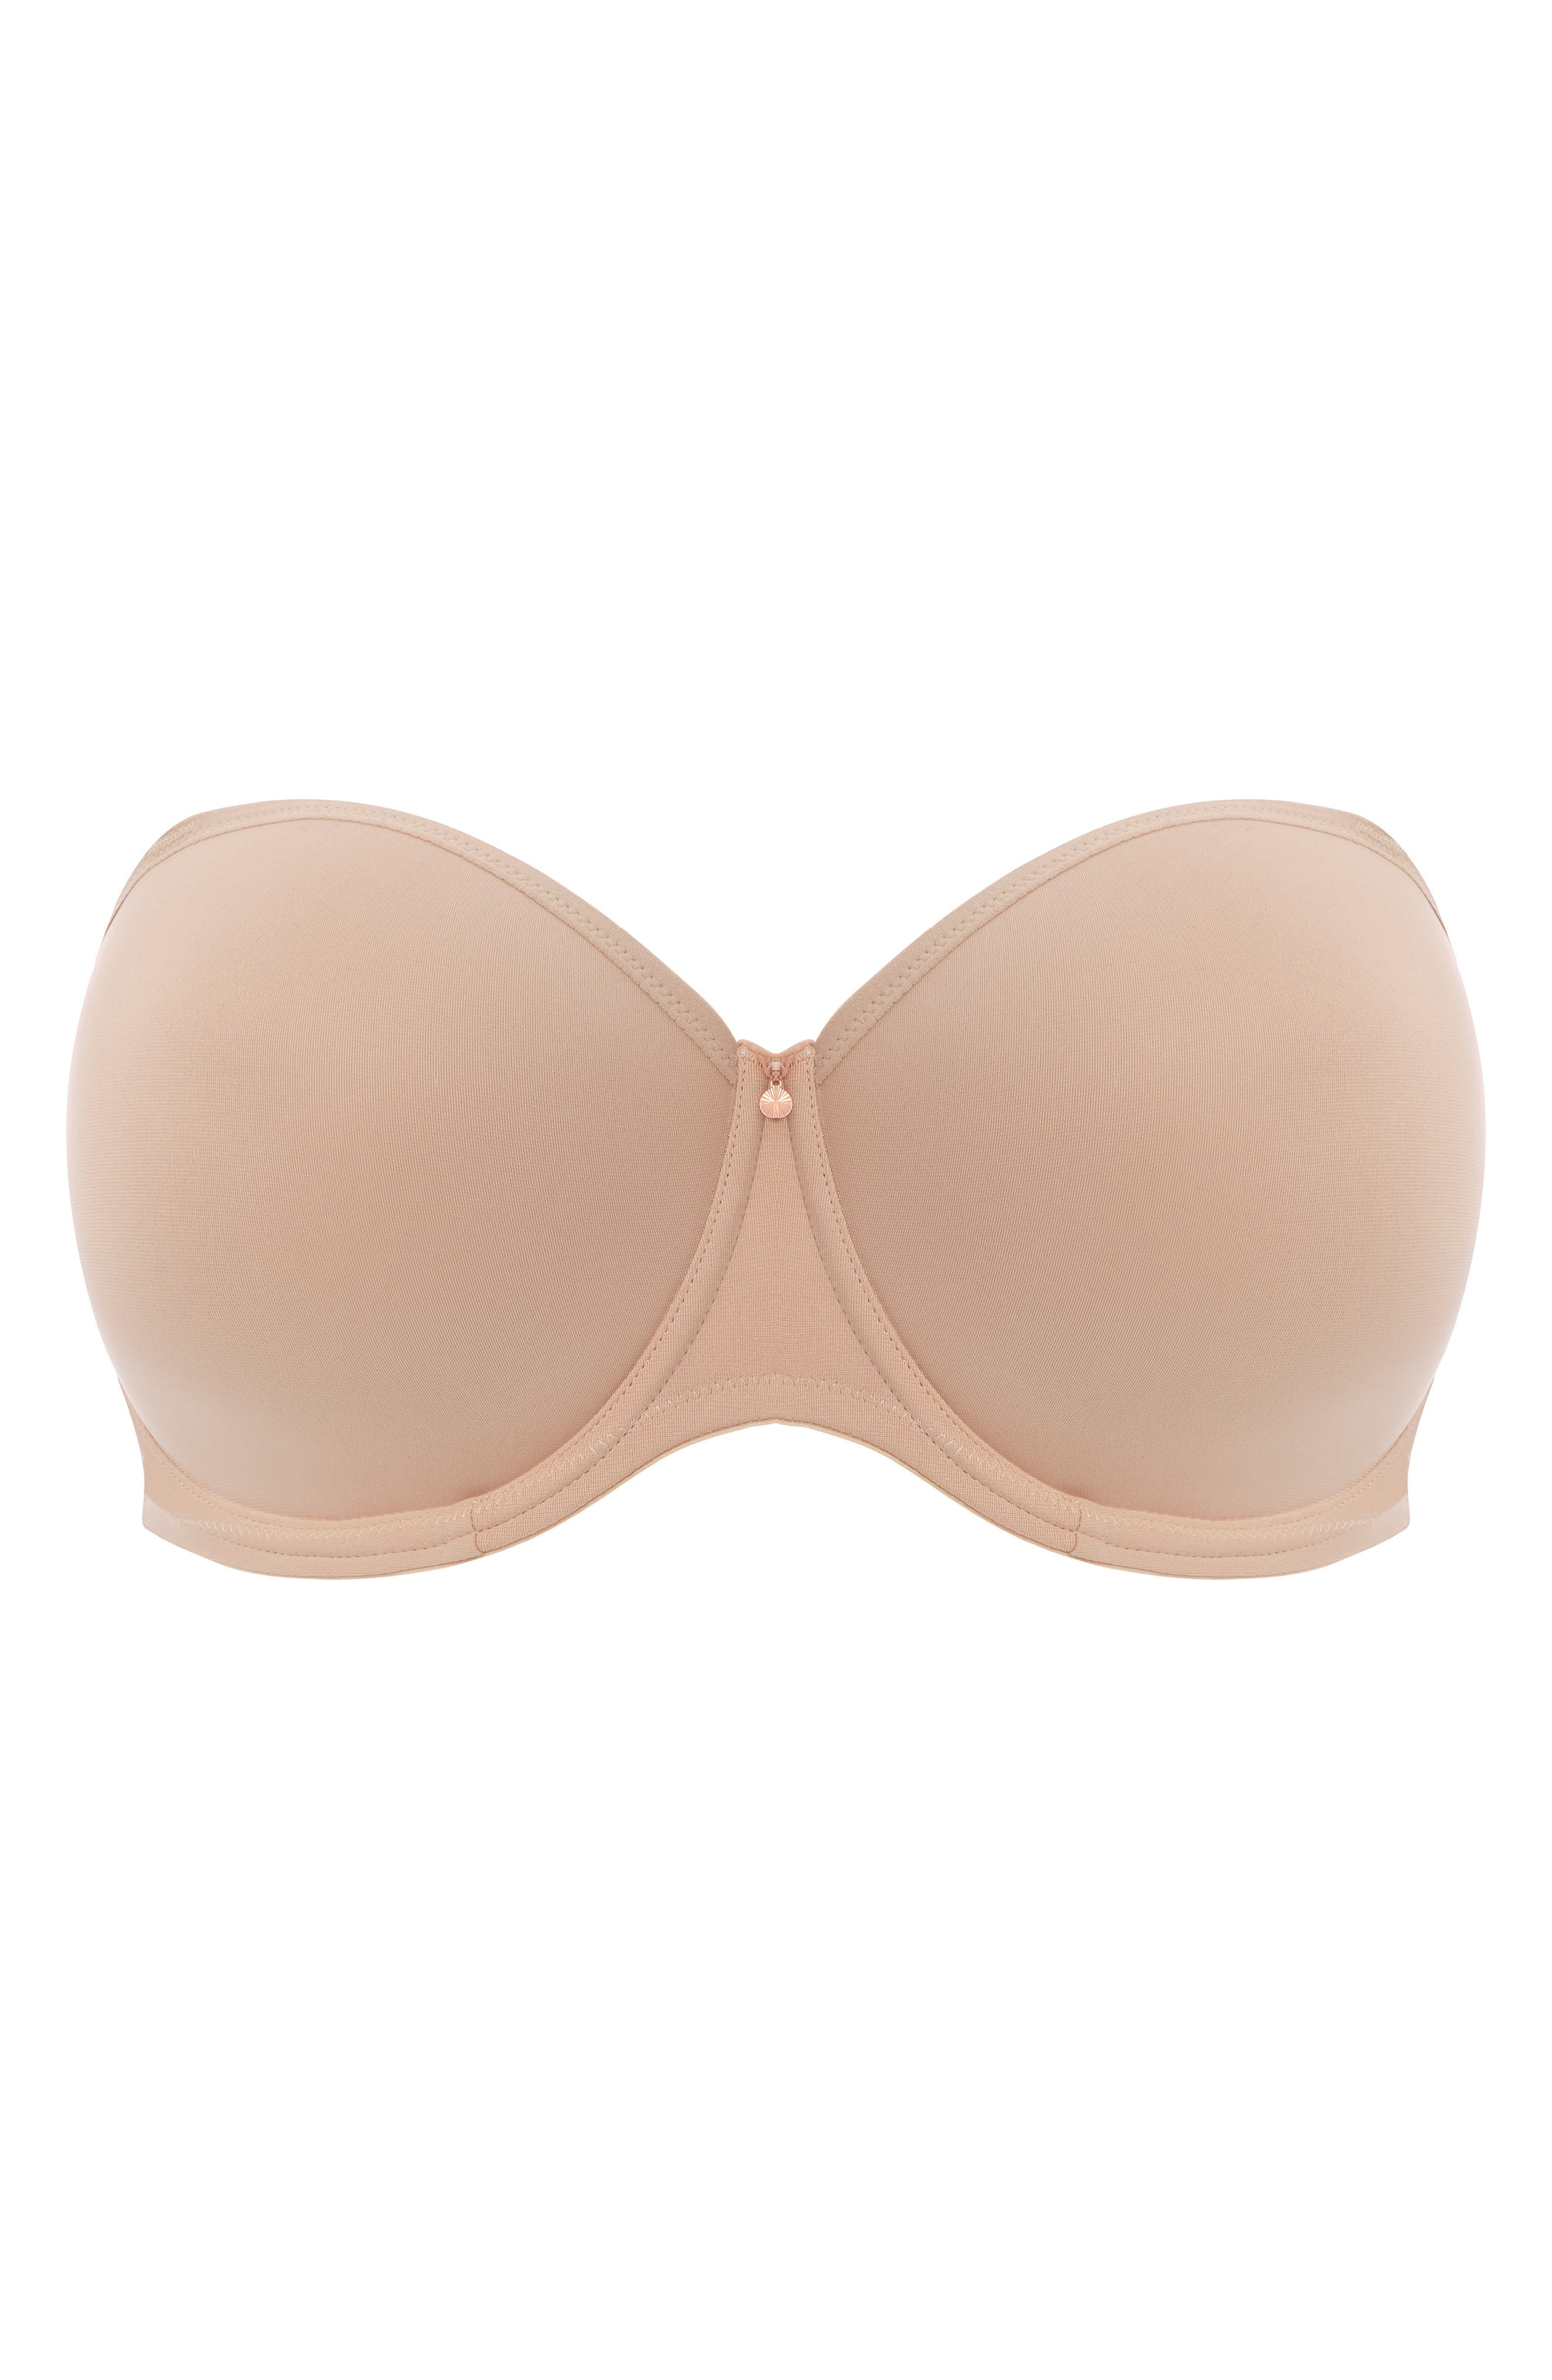 Elomi Smooth Moulded Seamless Underwire Strapless Bra